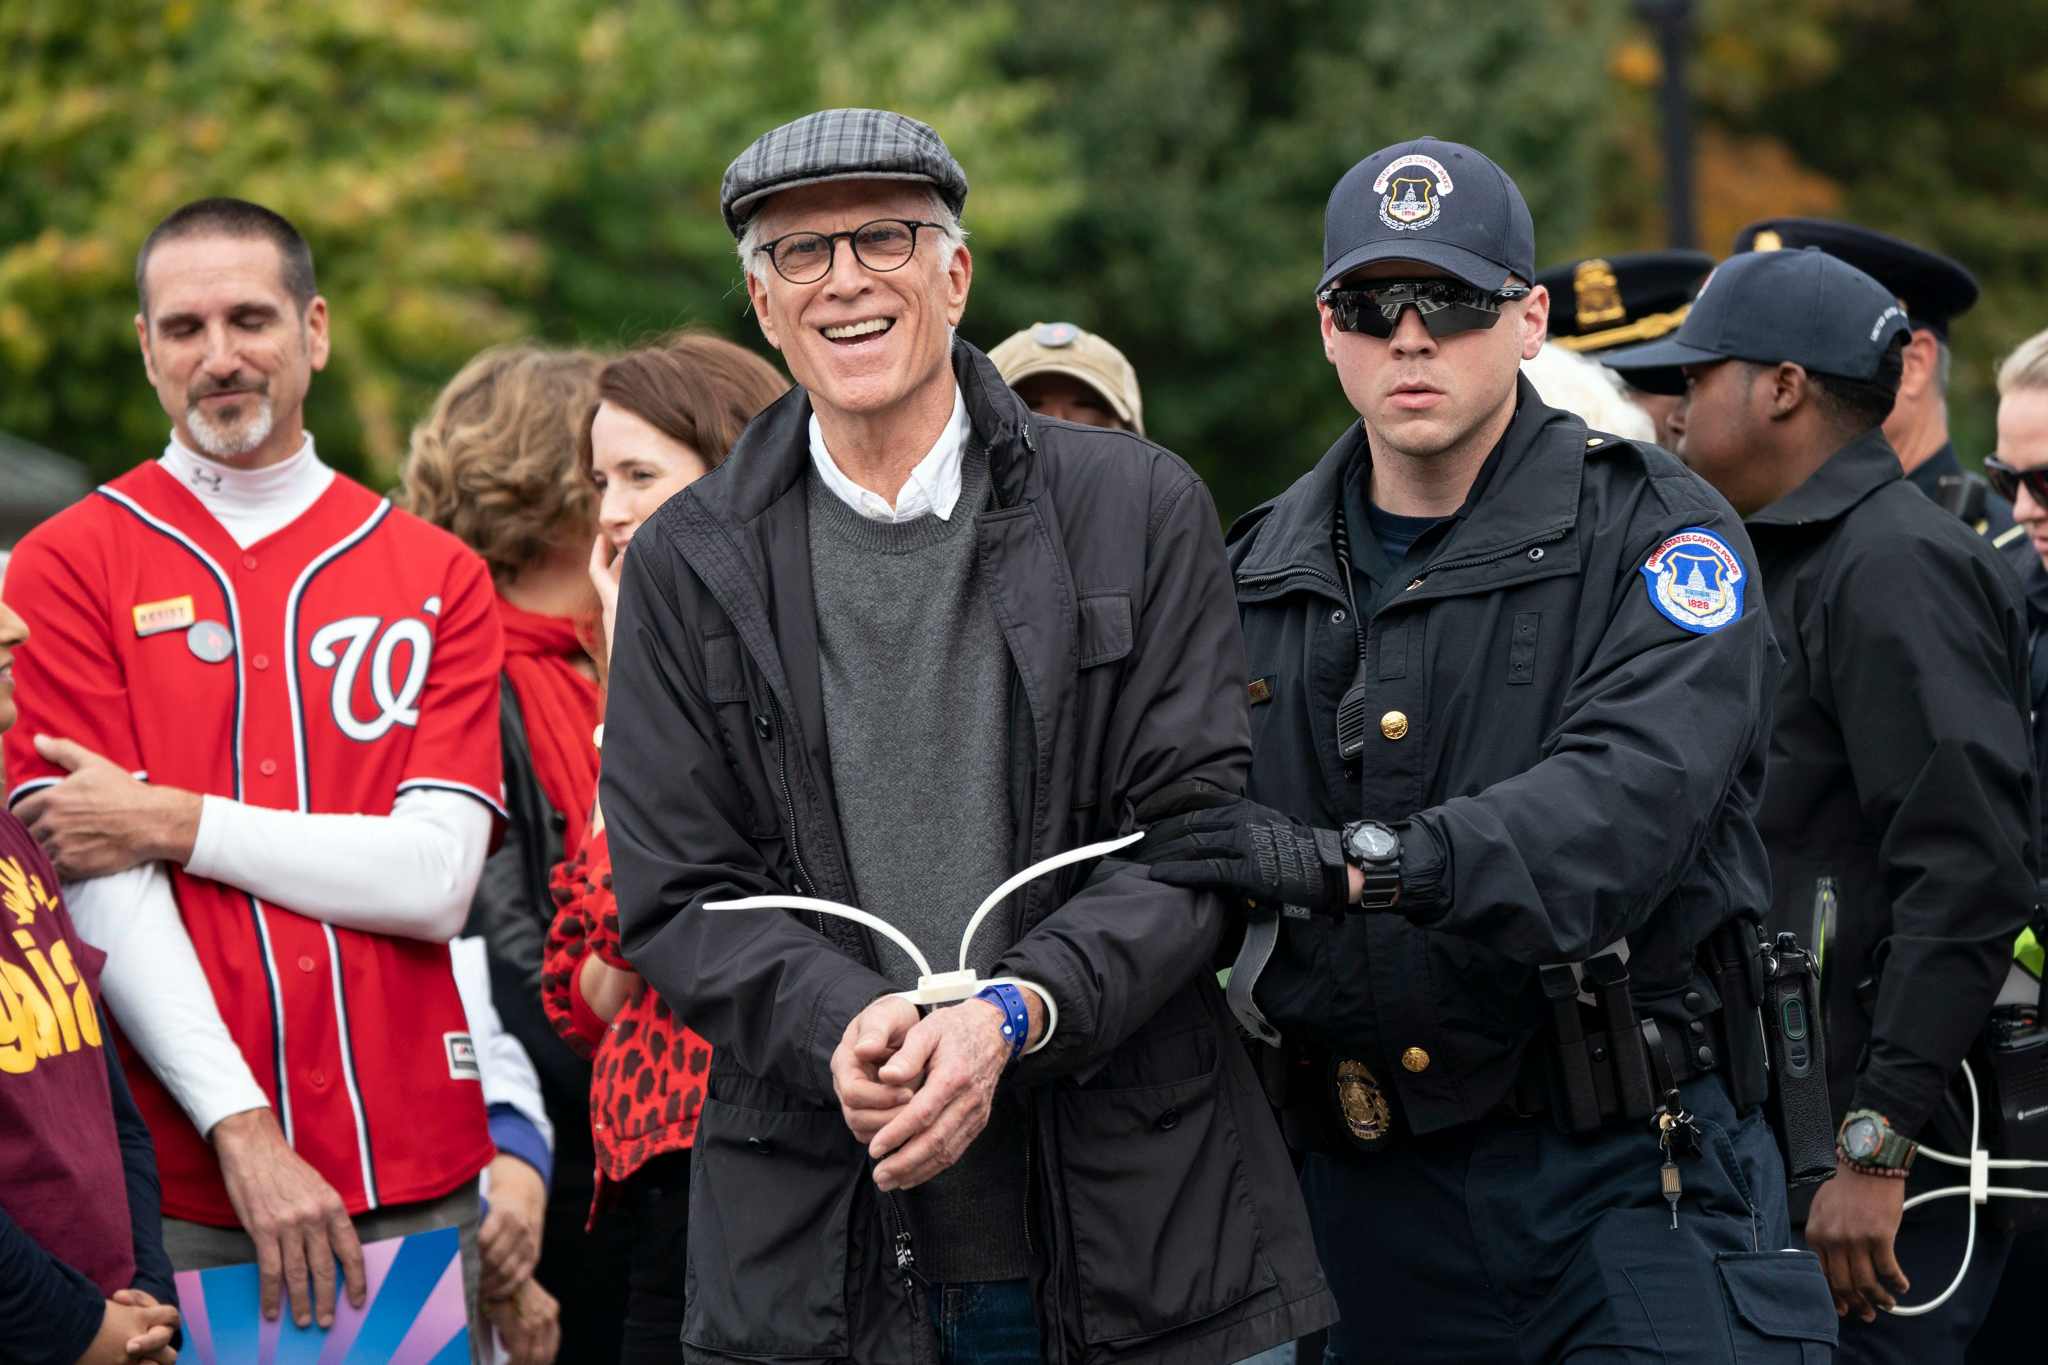 Ted Danson was arrested for protesting climate change in front of Capitol Hill. He seems content...